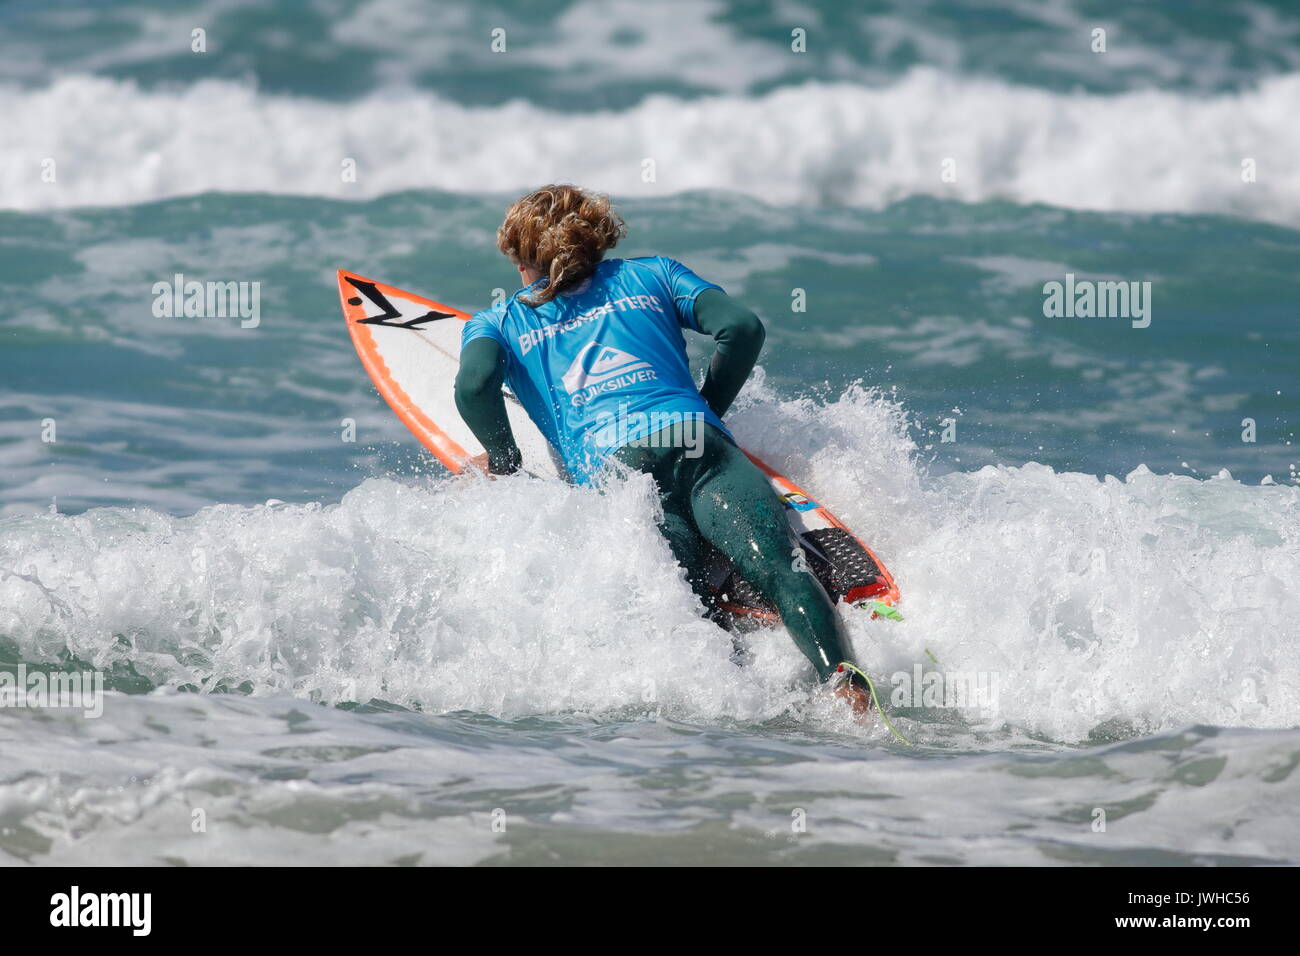 Fistral Beach, Newquay, Cornwall, UK. 12th Aug, 2017. Surfers take part in Day 4 of the Boardmasters Championship. Competitors from around the world take part in the UK's biggest surf contest. Australian Lliam Mortensen shows his skills. Credit: Nicholas Burningham/Alamy Live News Stock Photo